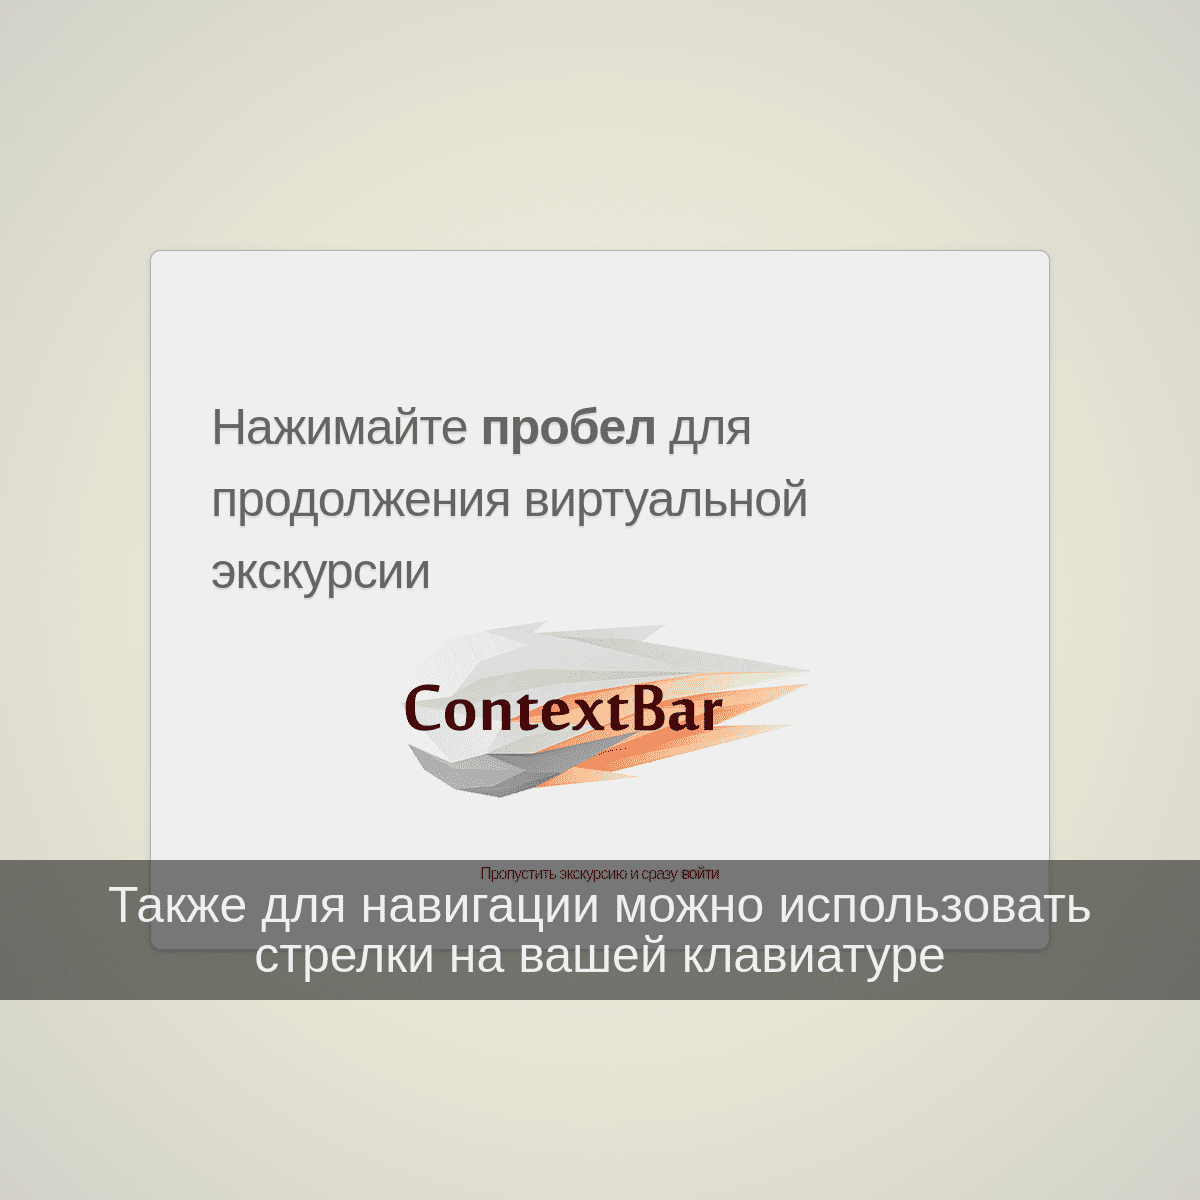 A complete backup of contextbar.ru